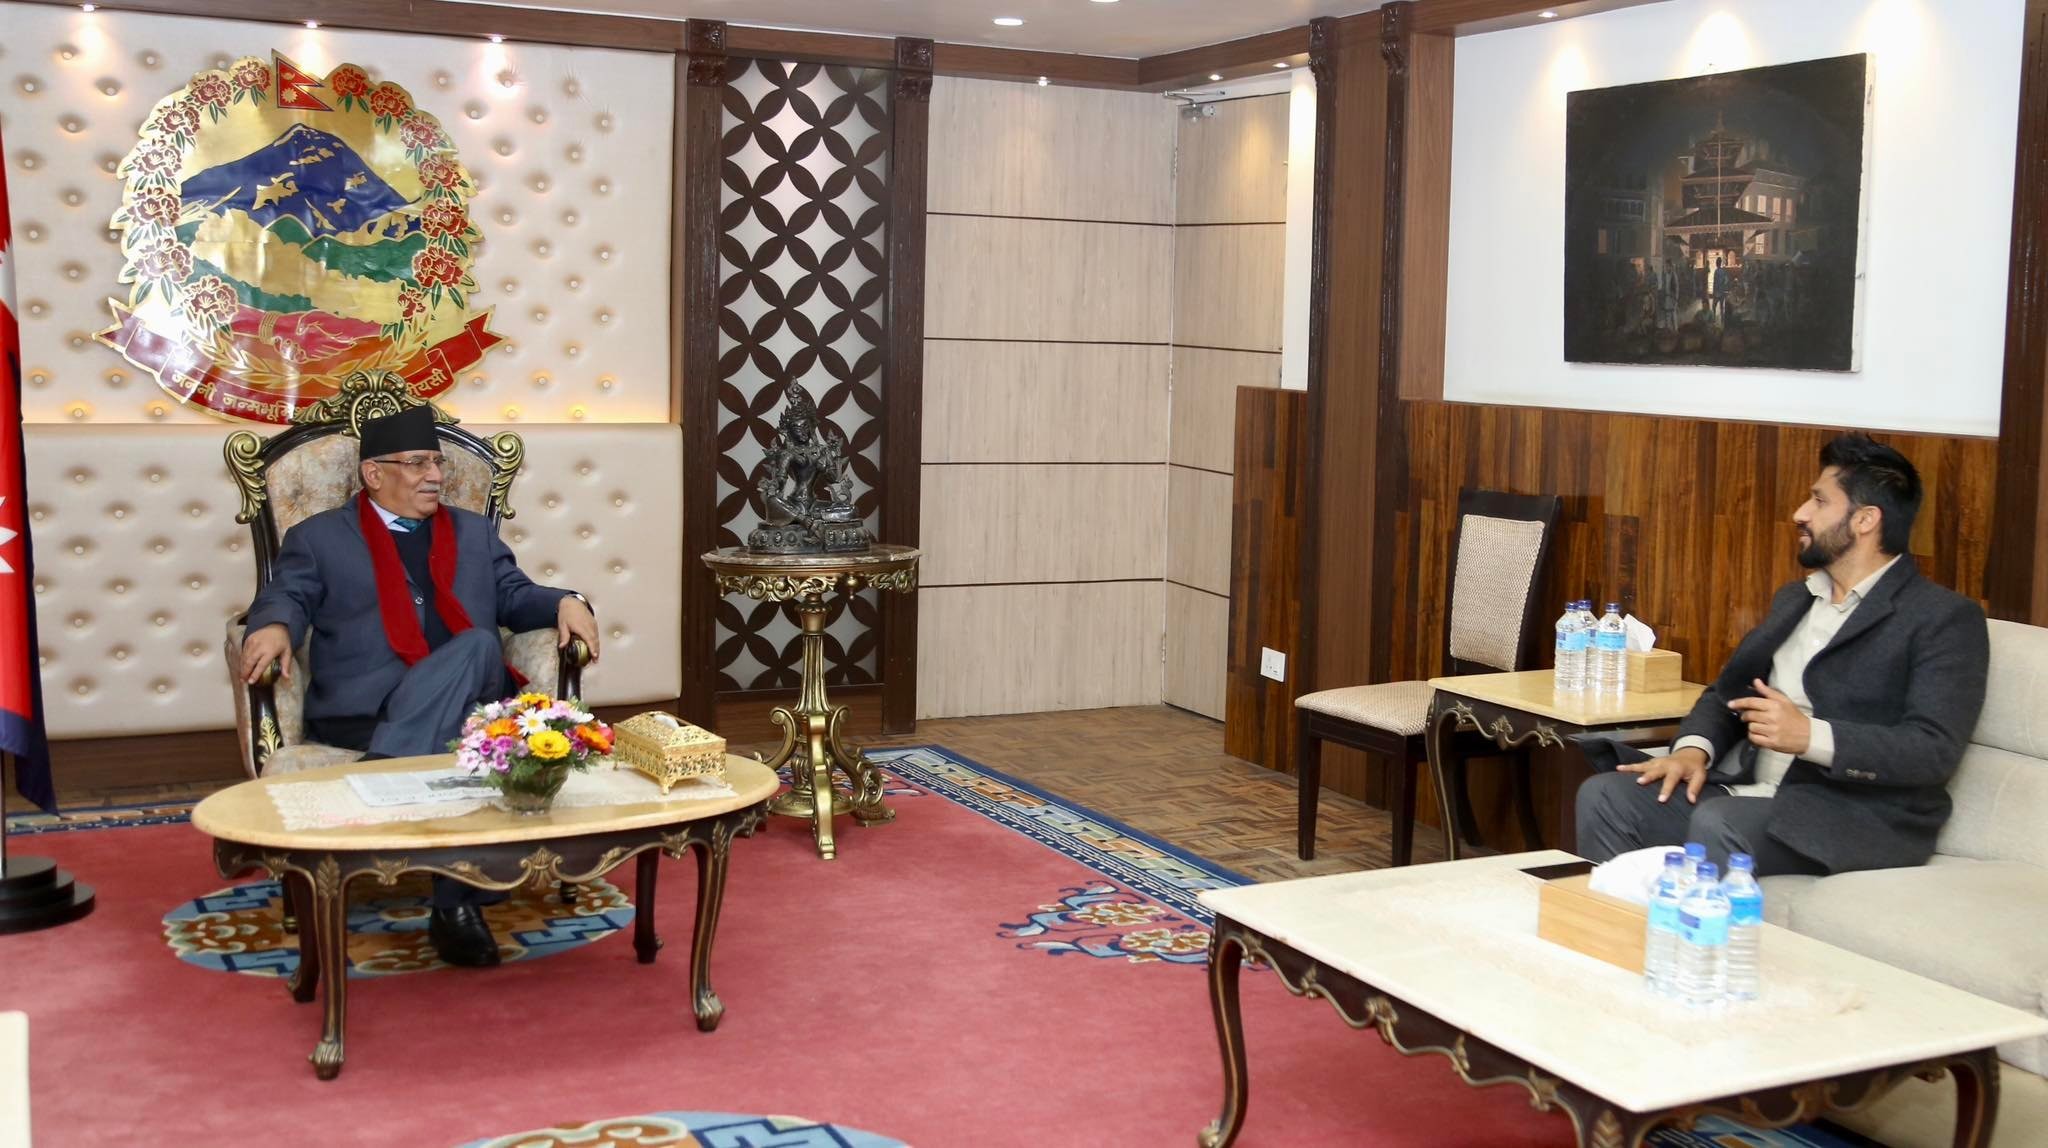 Prime Minister Prachanda and Home Minister Rabi Lamichhane meeting on discussion cabinet expansion